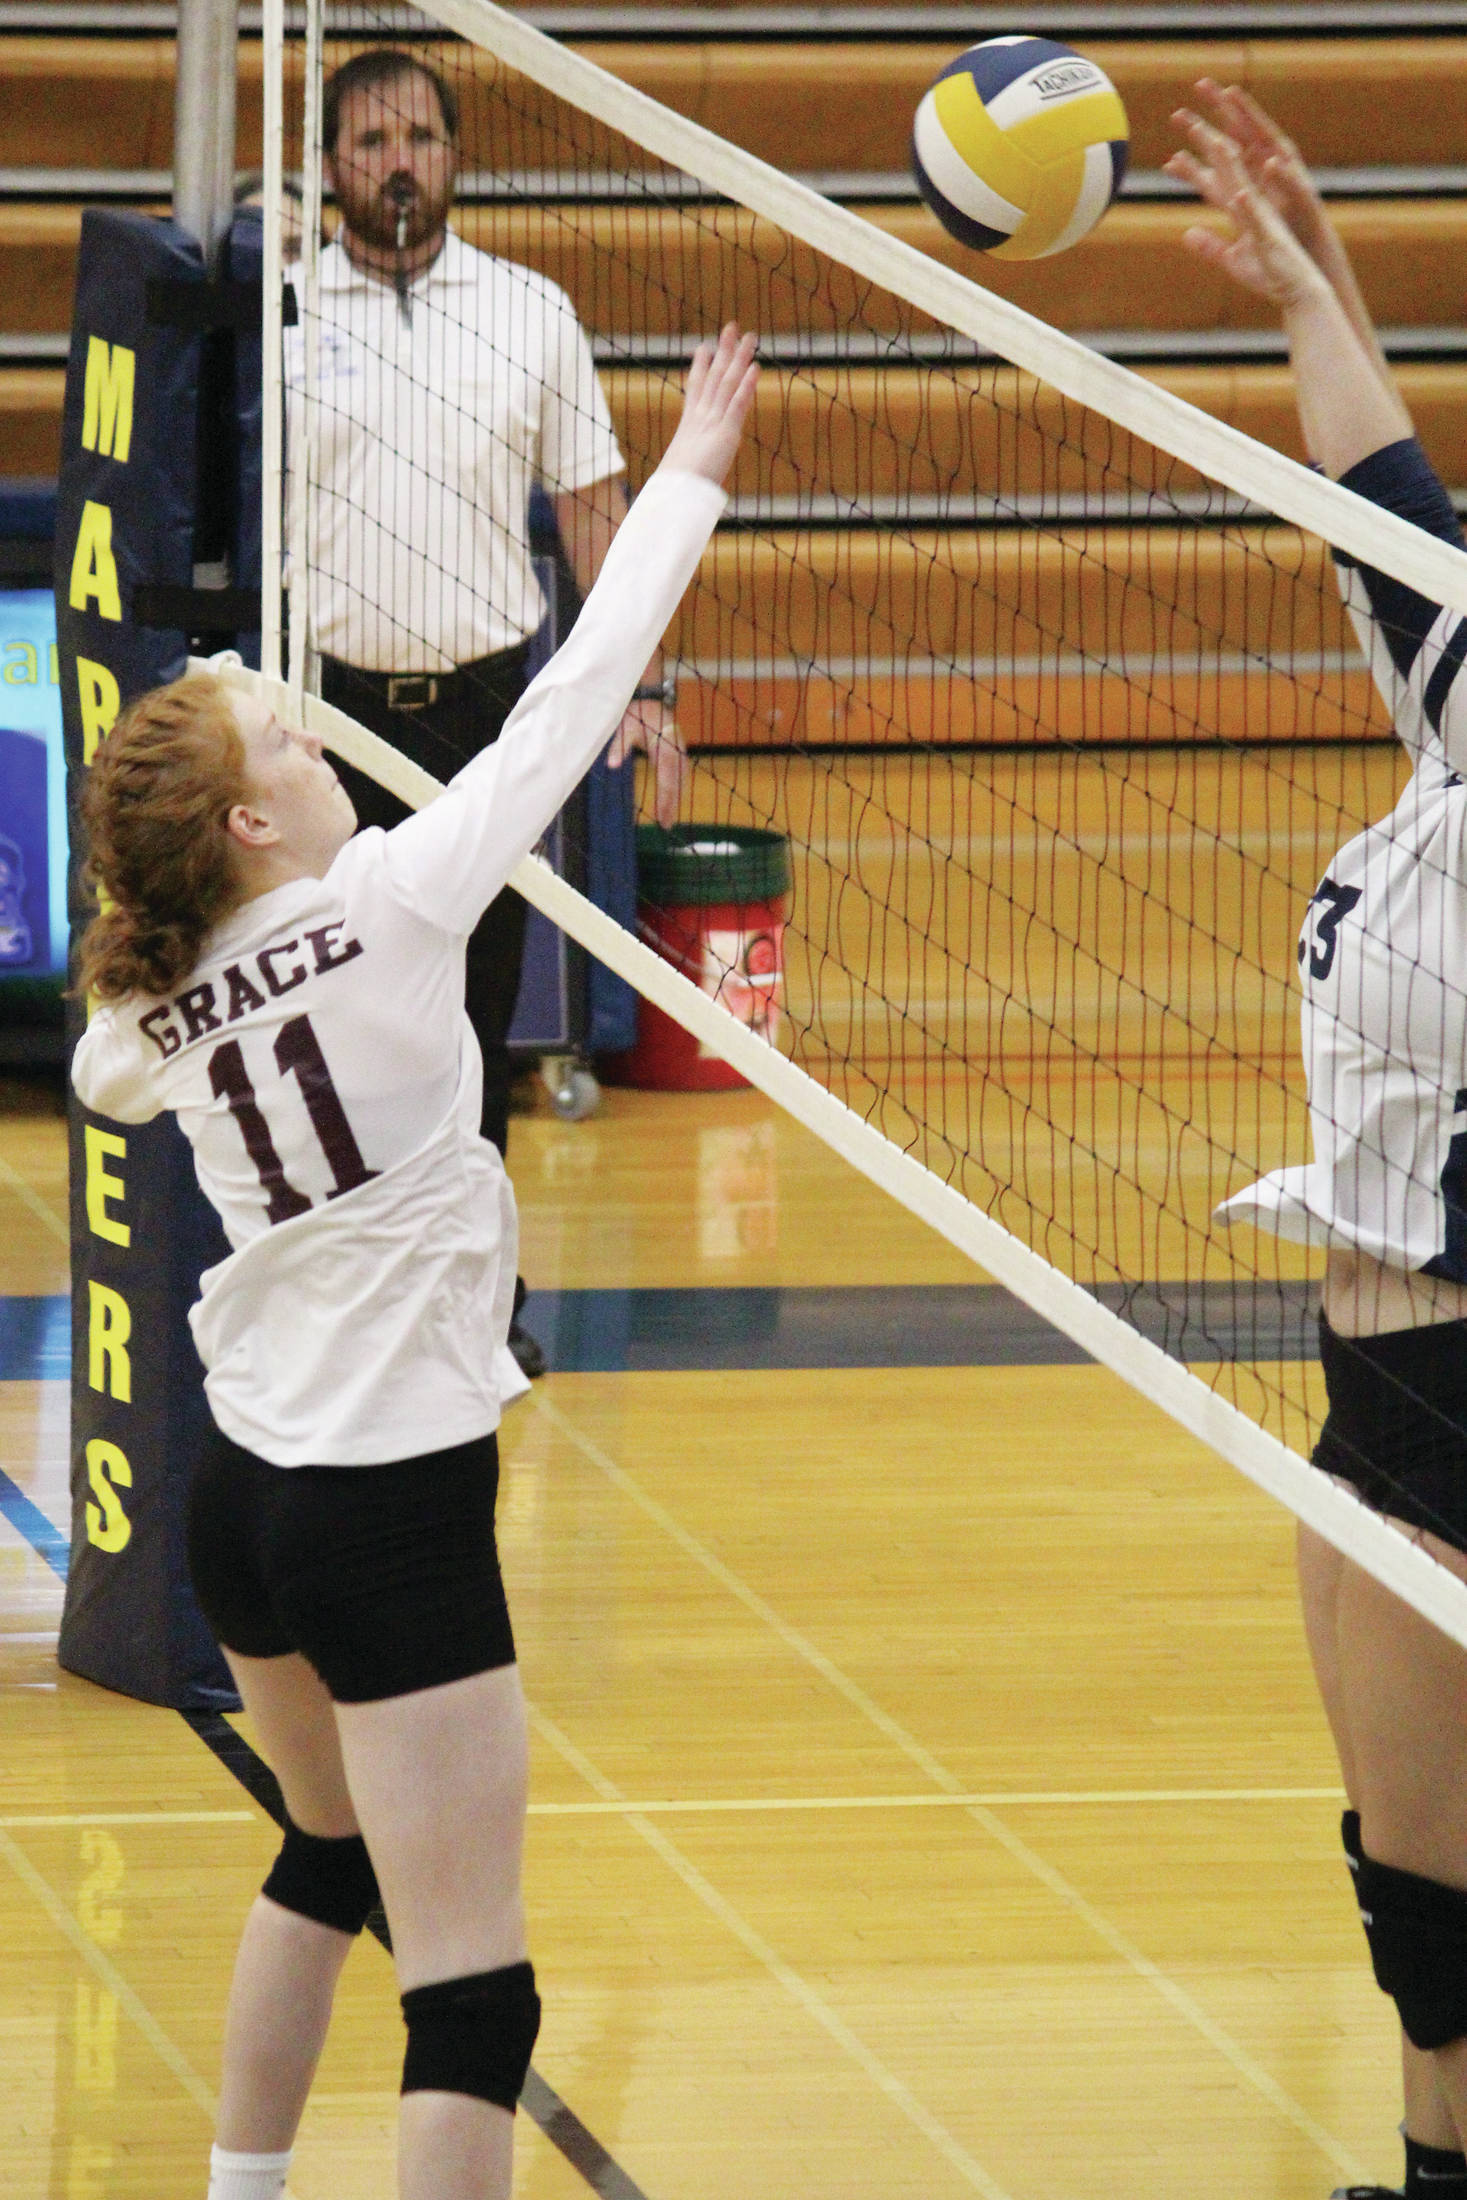 Rachel McGovern of Grace Christian Schools tips the ball over the net to the Homer Mariners during a Friday, Sept. 27, 2019 volleyball game at the Alice Witte Gymnasium in Homer, Alaska. (Photo by Megan Pacer/Homer News)